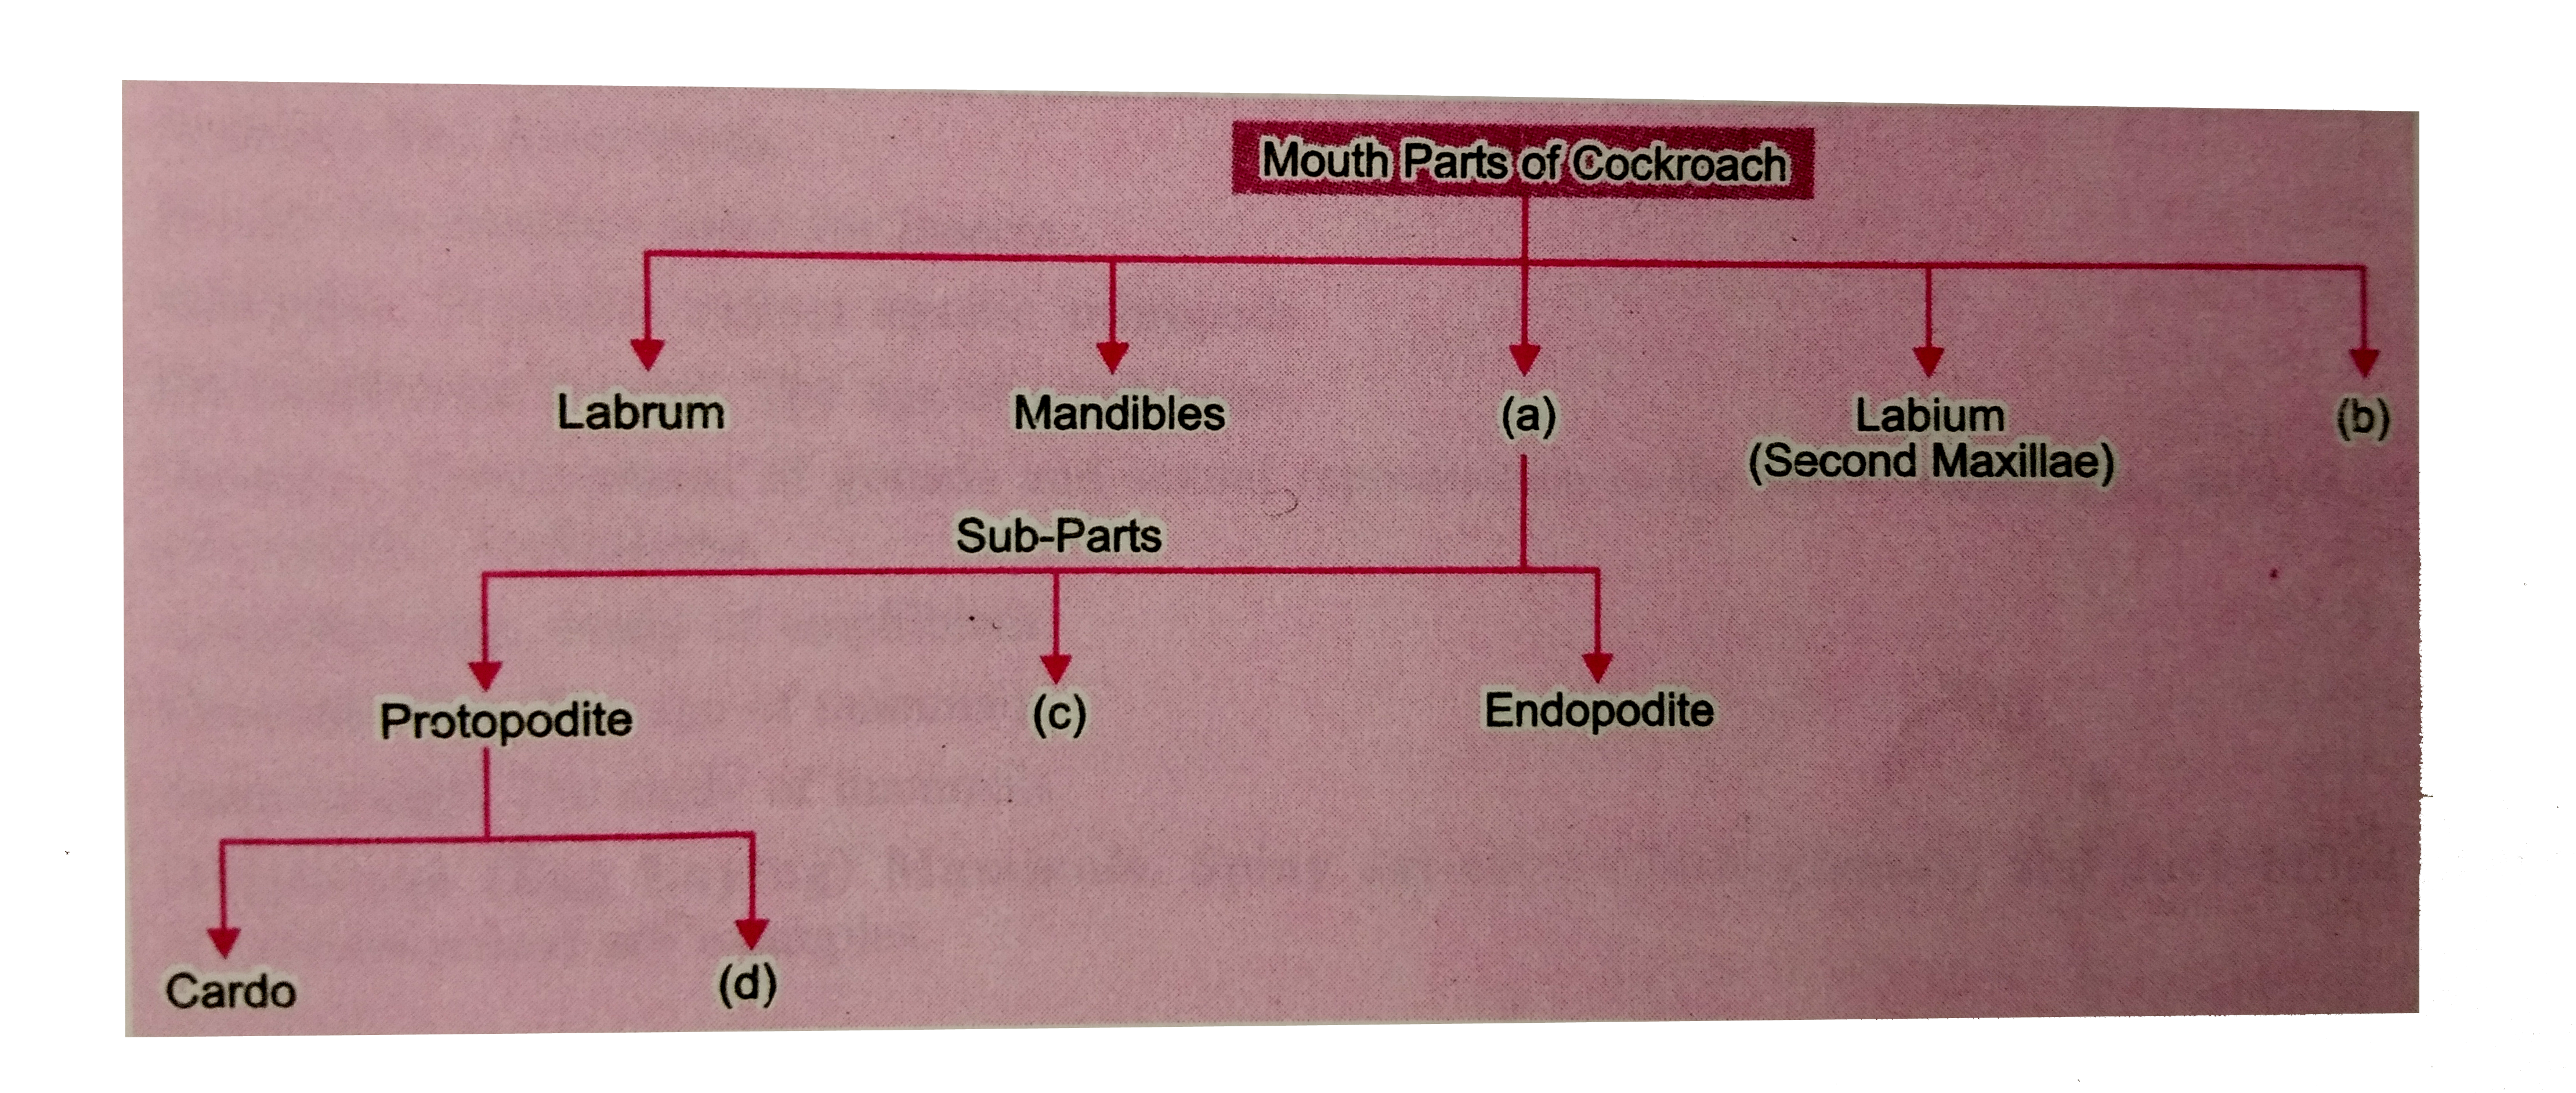 Carefully study the incomplete flow chart of mouth parts of cockroach. Fill in the blanks (a),(b),(c) and (d).